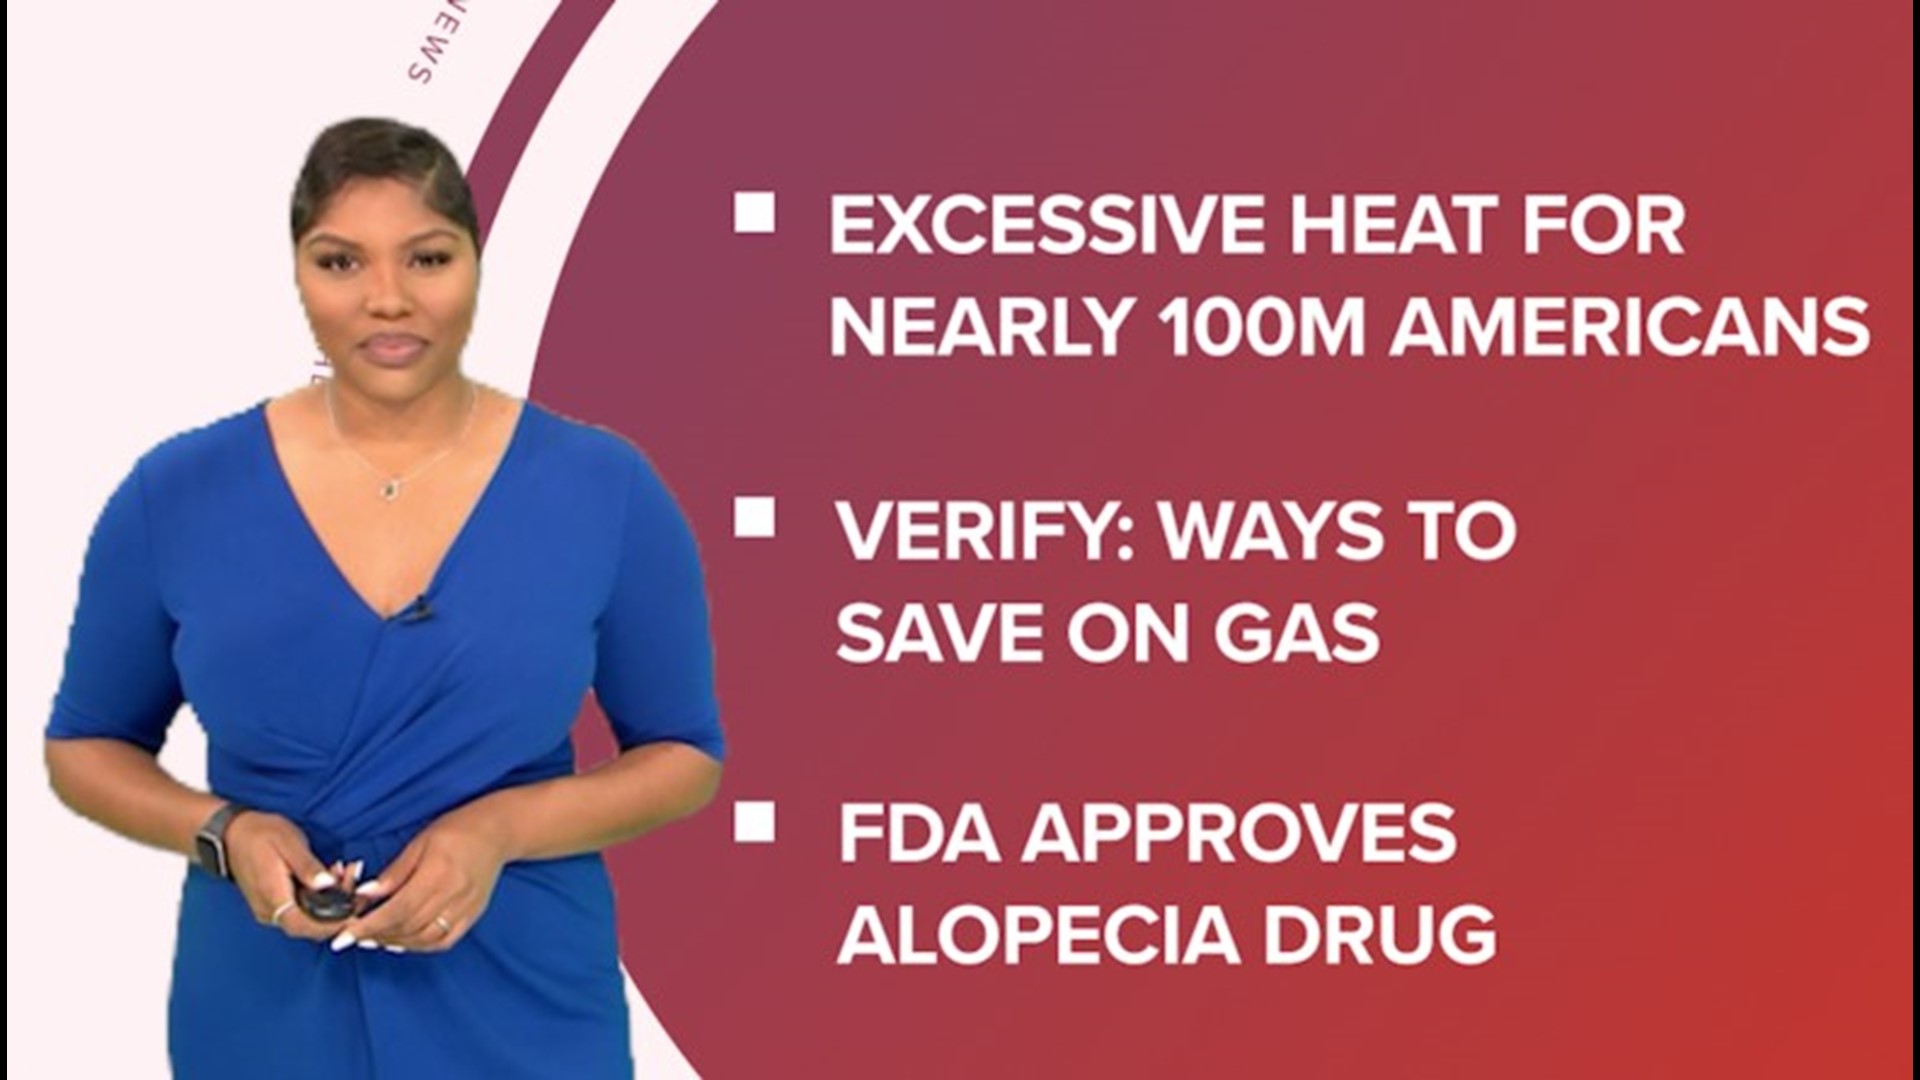 A look at what is happening across the U.S. from a heat wave impacting millions, FDA approving an alopecia drug, and the end of Internet Explorer.